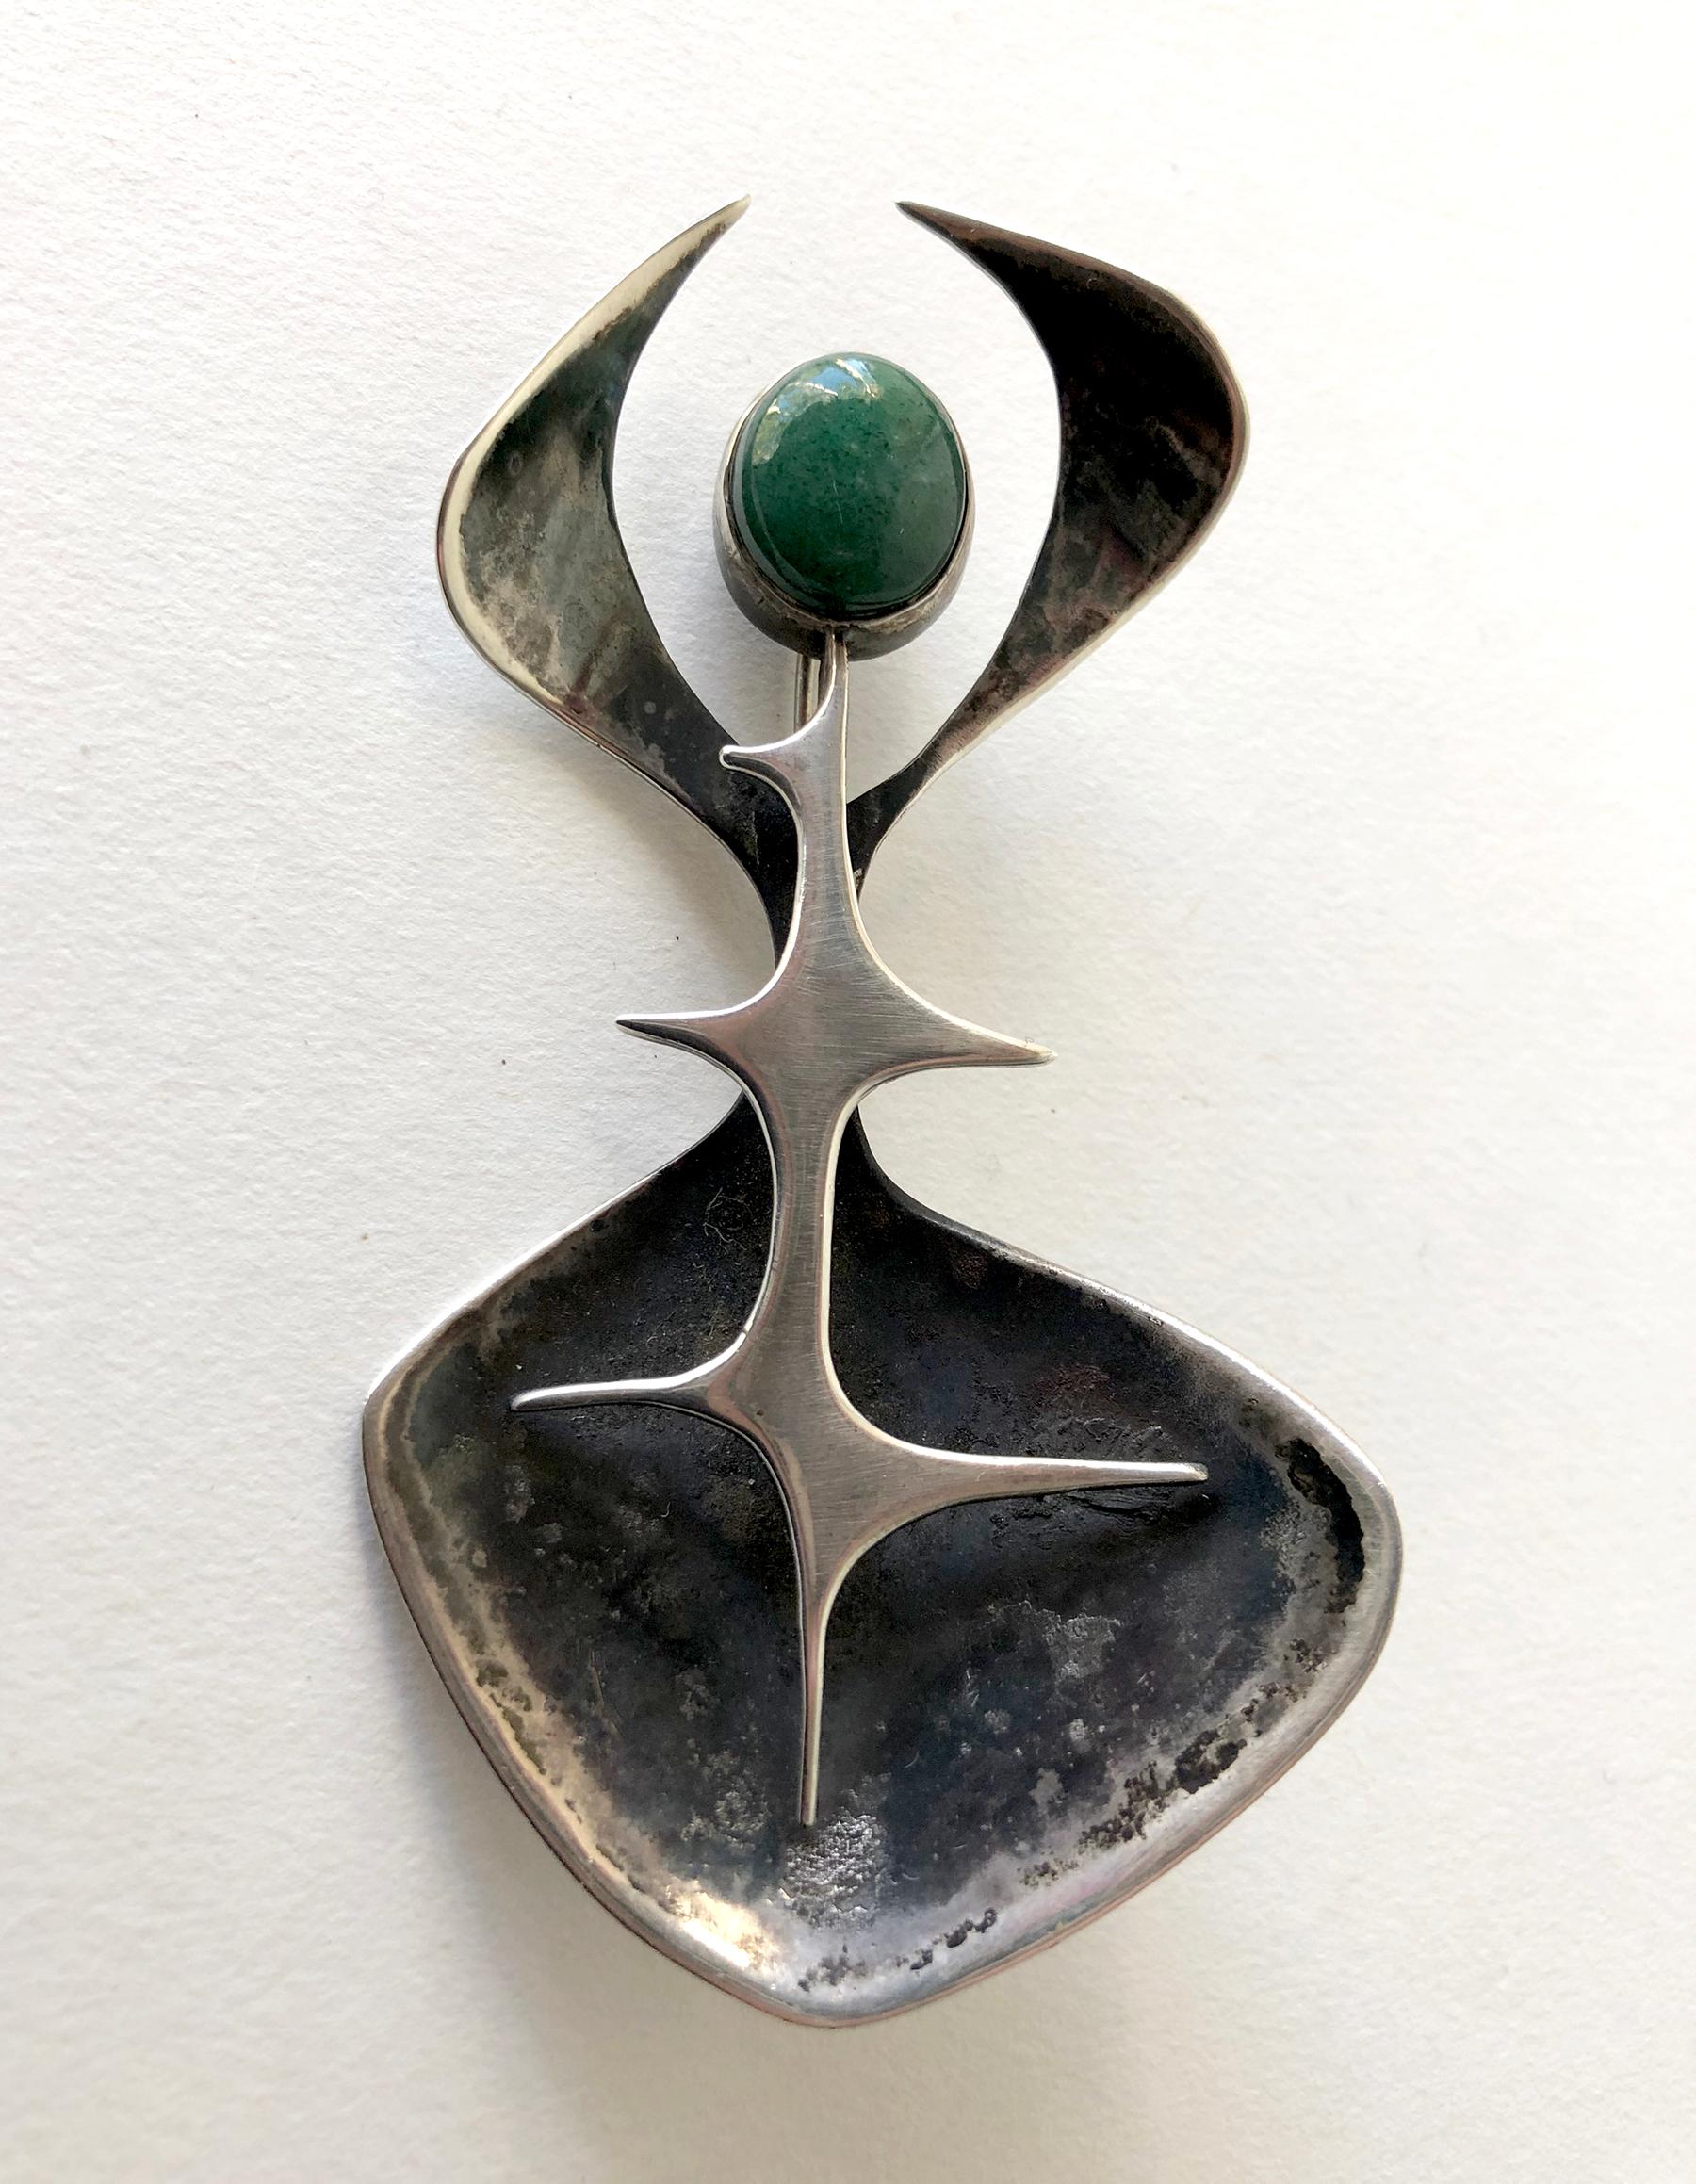 Rare 1950's sterling silver abstract modern brooch featuring an aventurine cabochon created by jeweler Susan Saunders Cook of Canandaigua, New York.  Brooch measures 3 5/8